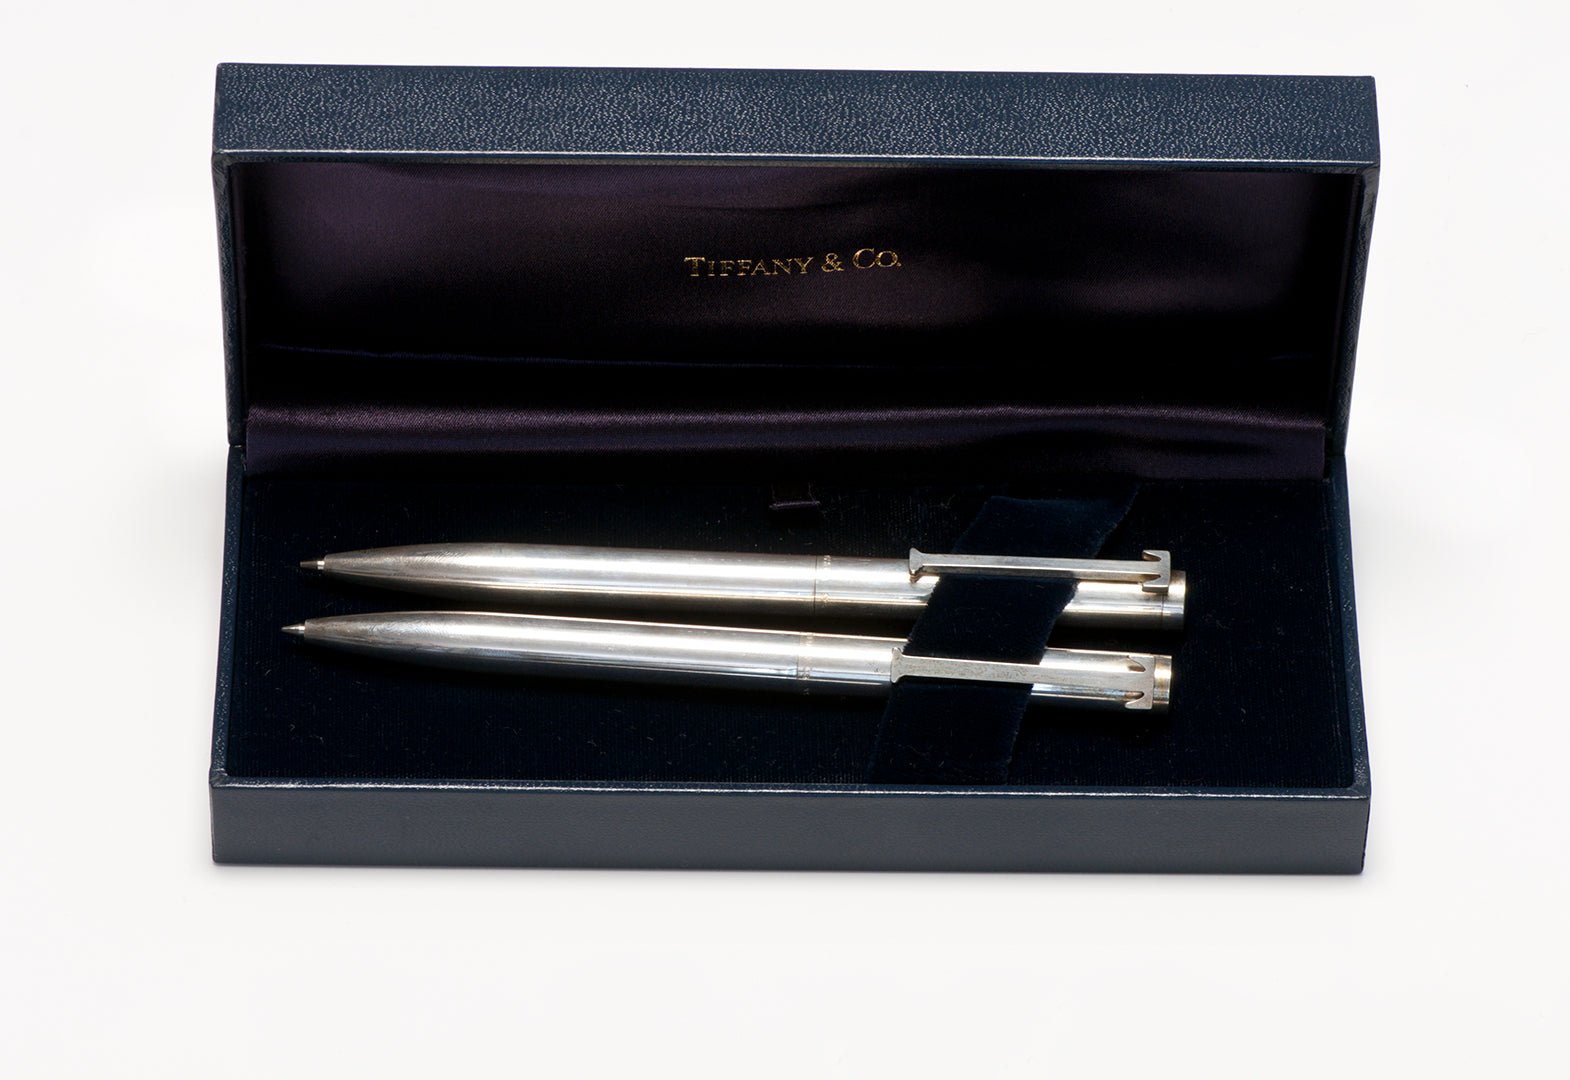 Tiffany & Co. Sterling Silver Pencil and Ballpoint Pen Set & Box